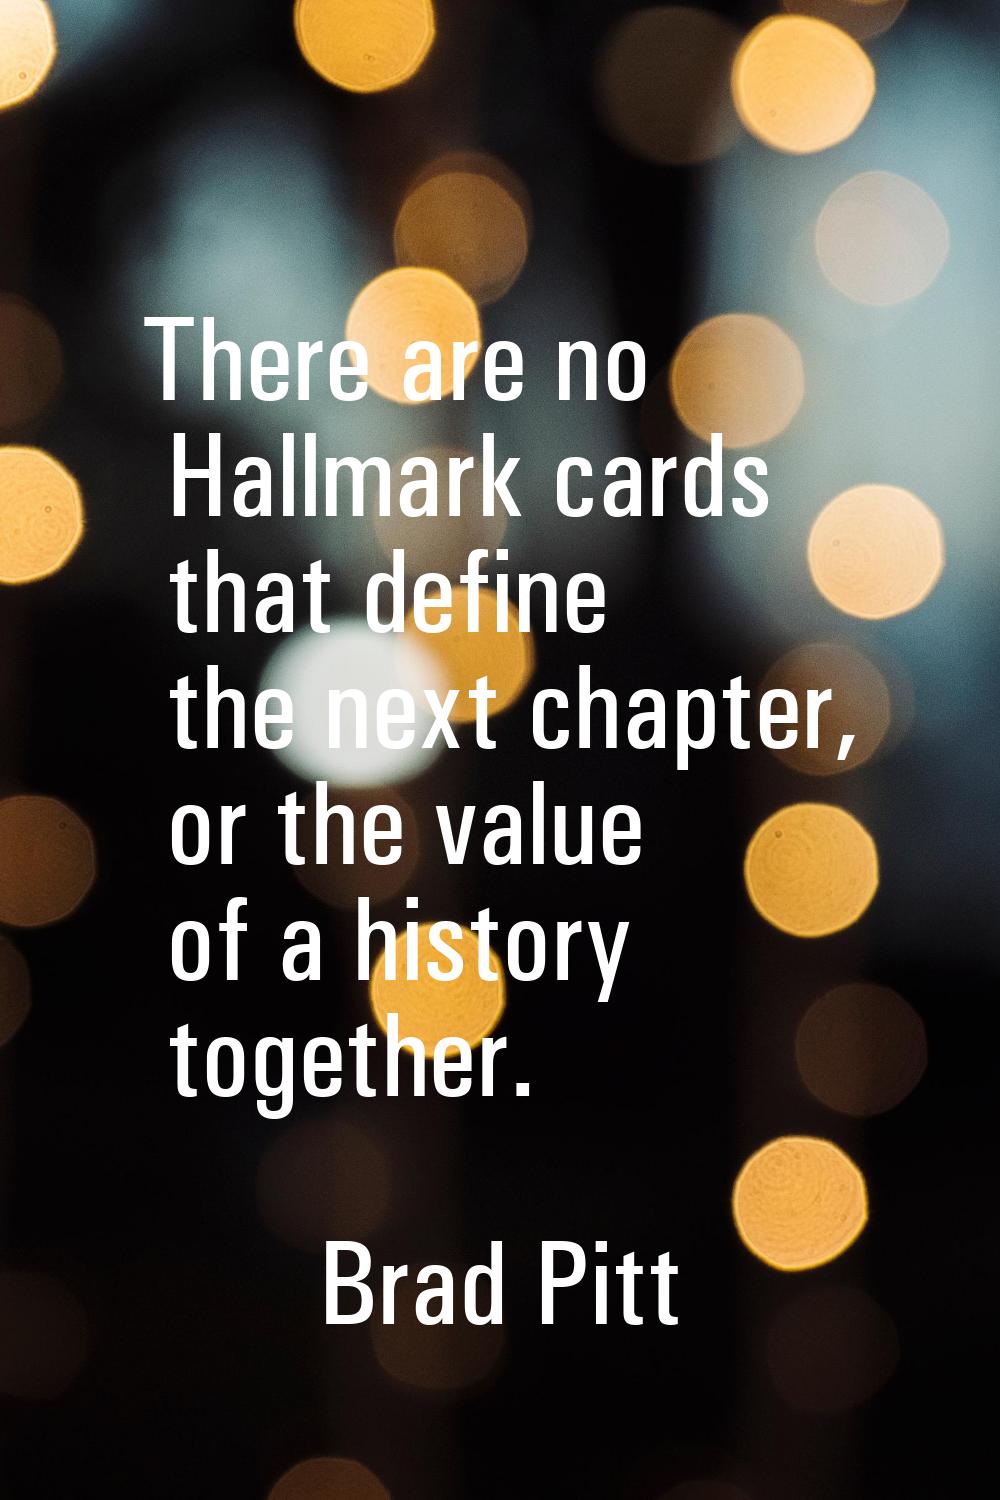 There are no Hallmark cards that define the next chapter, or the value of a history together.